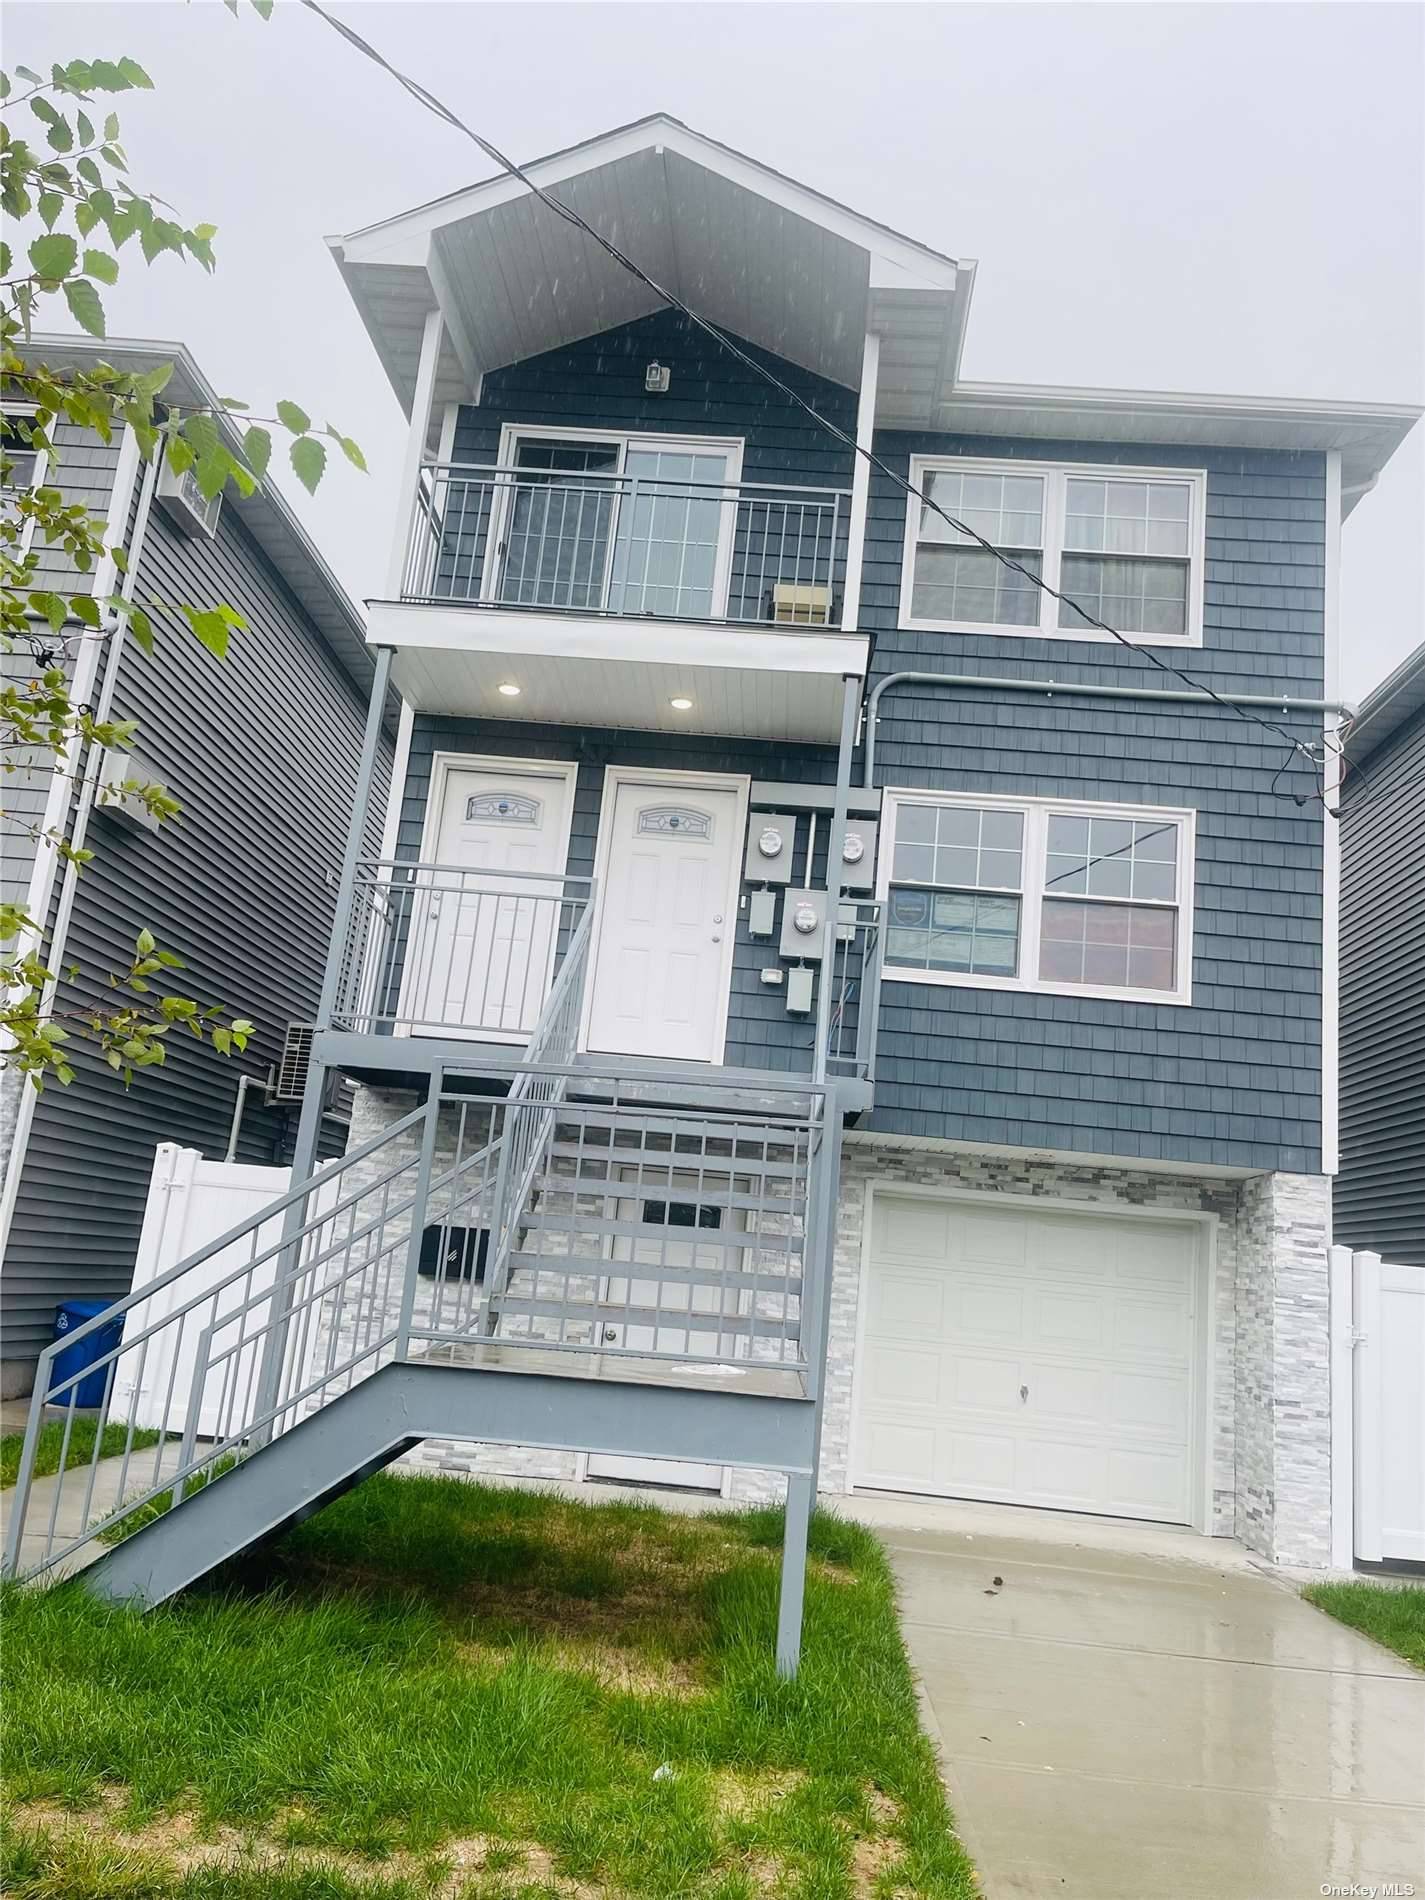 WELCOME TO ARVERNE. Amazing 3 bedroom Rental on Beach 68th Street Arverne NY.